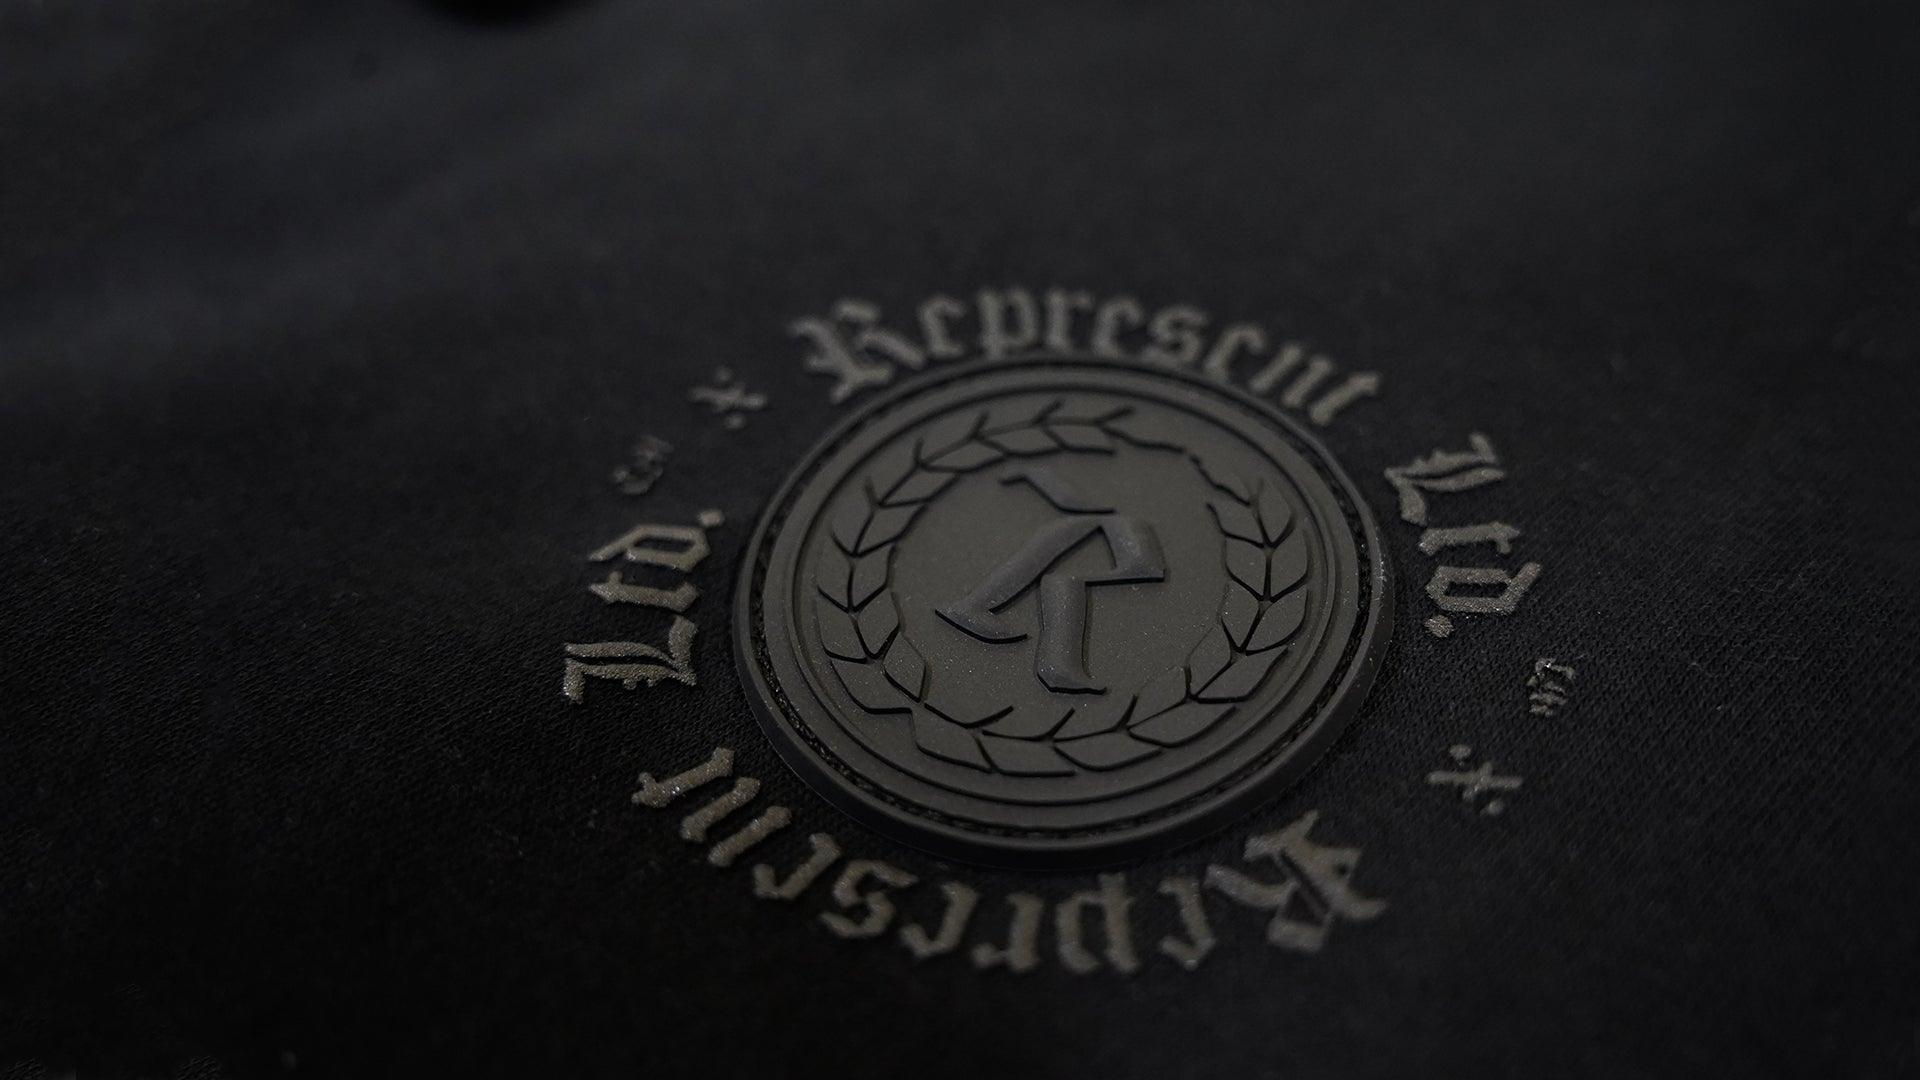 Blacked Out PVC Rubber Silicone Patch Set OUT NOW! - Represent Ltd.™